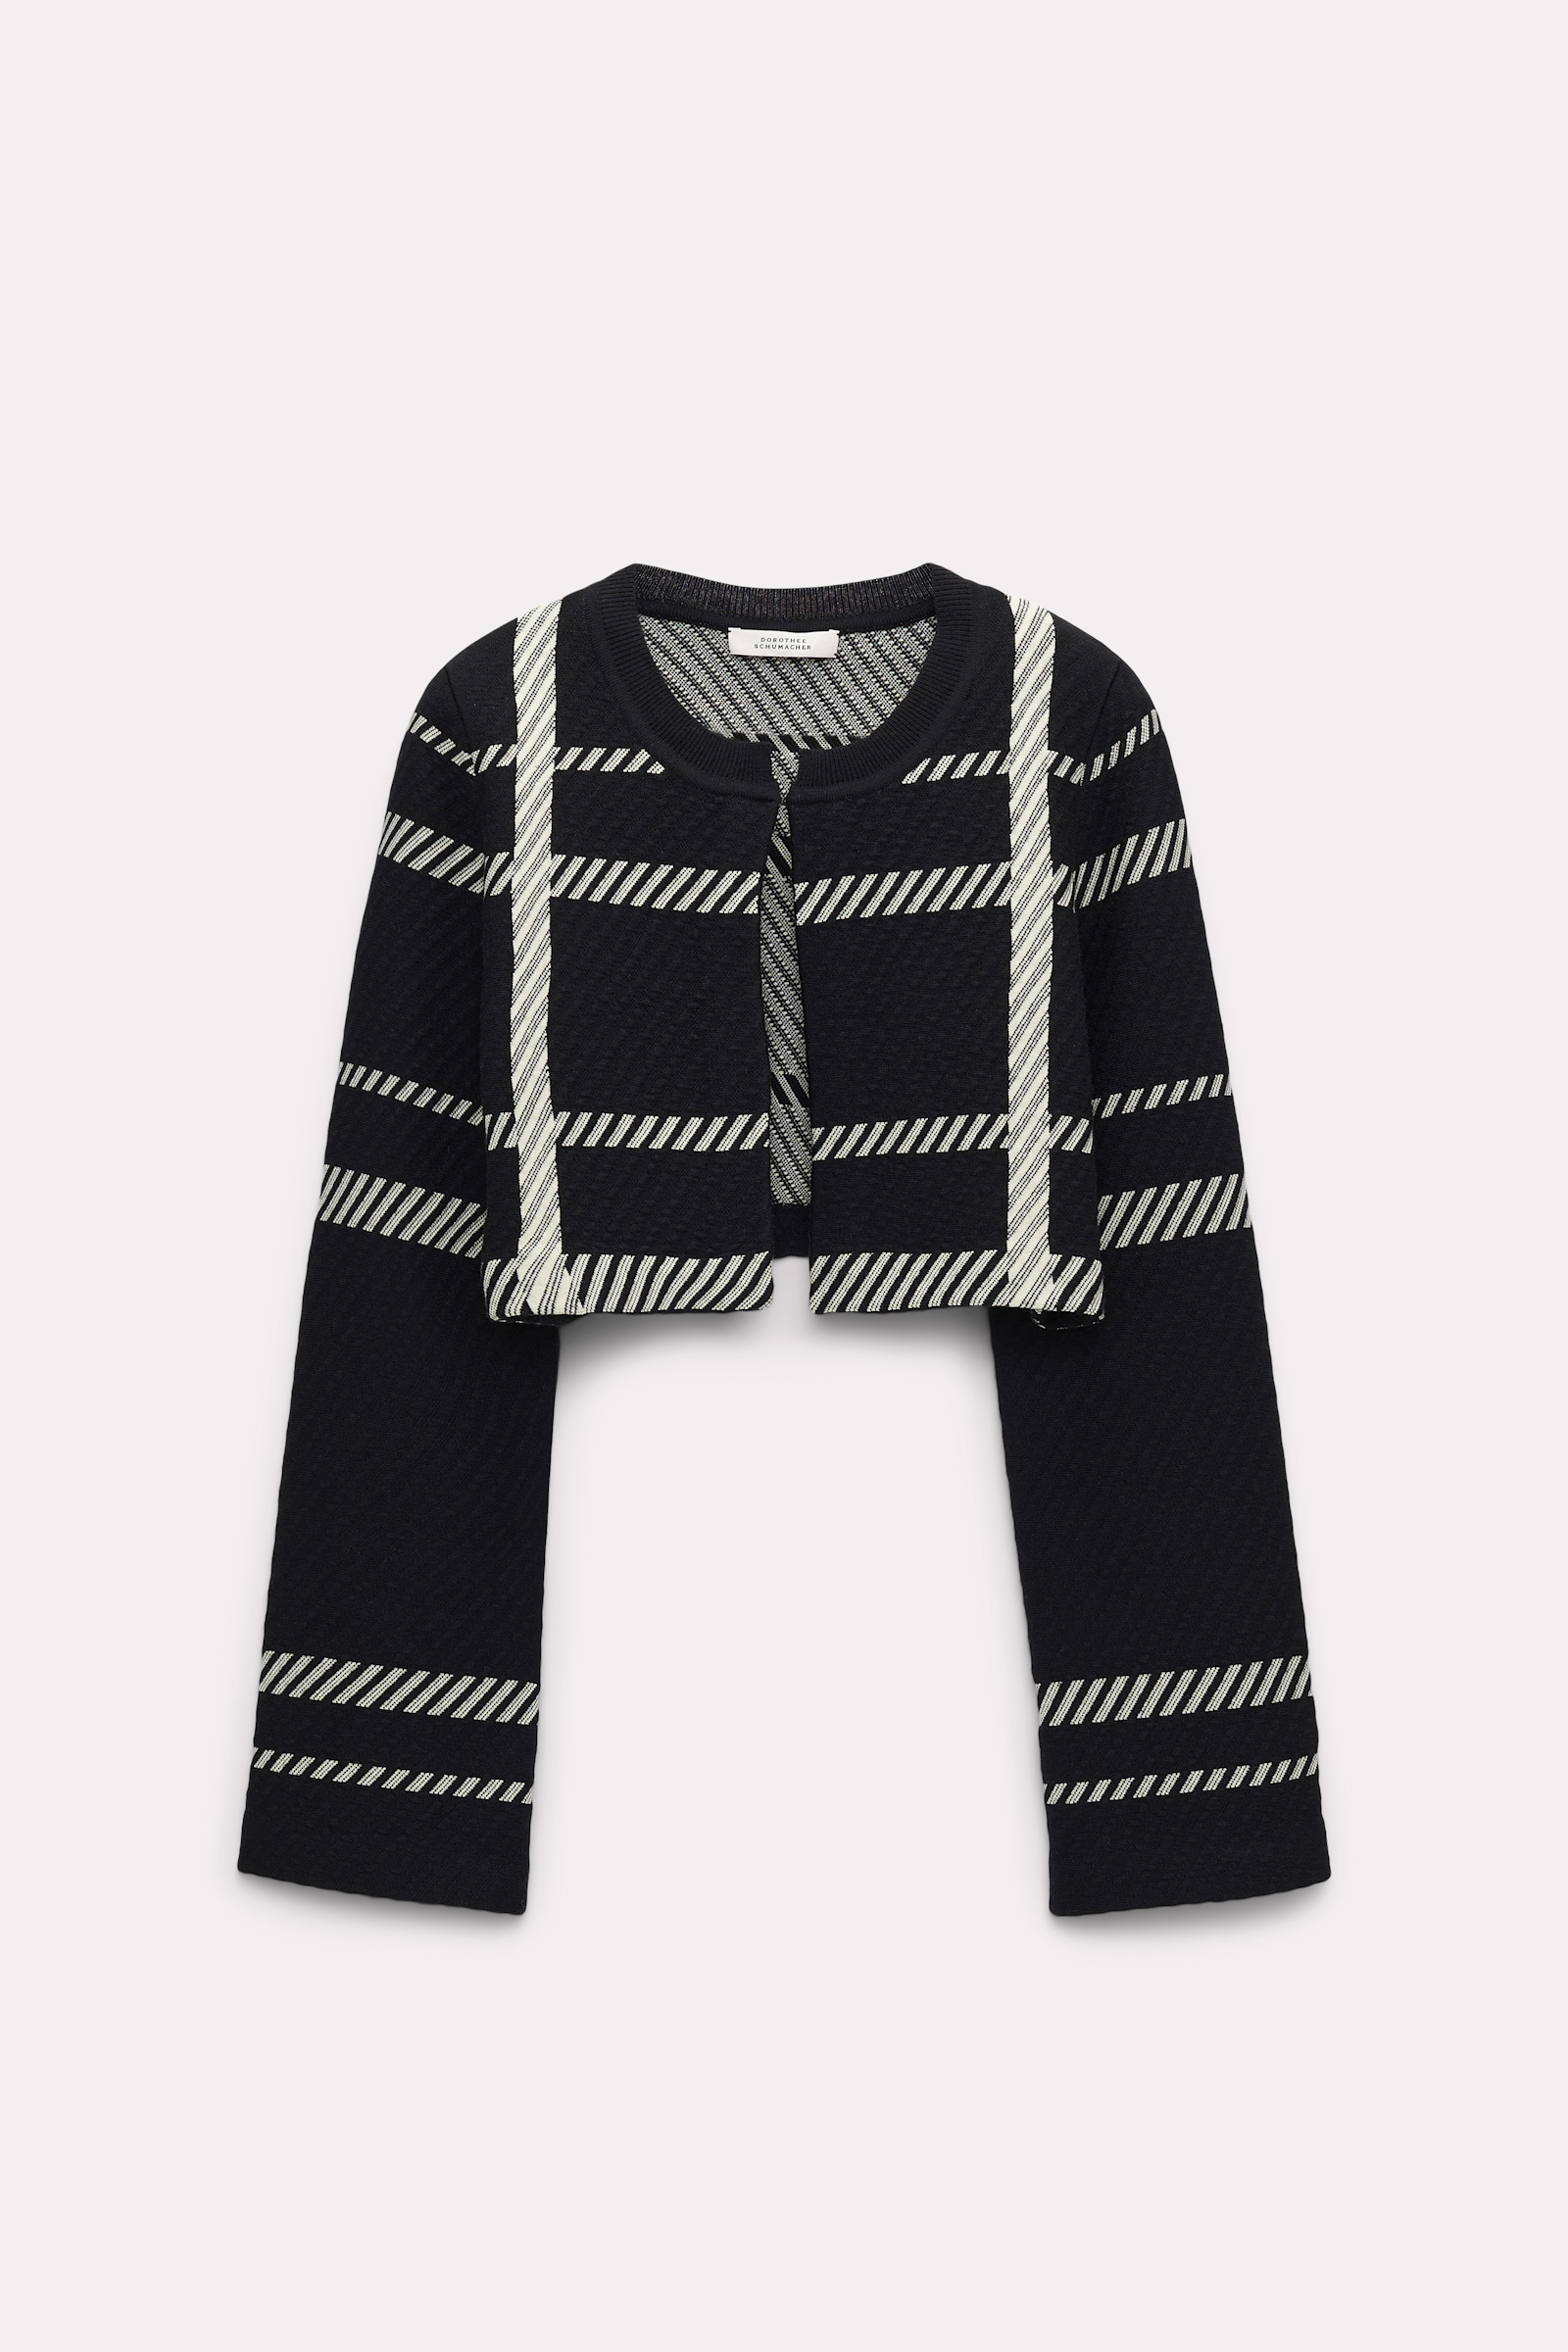 Dorothee Schumacher Plaid knit cropped cardigan camelia white with glold print